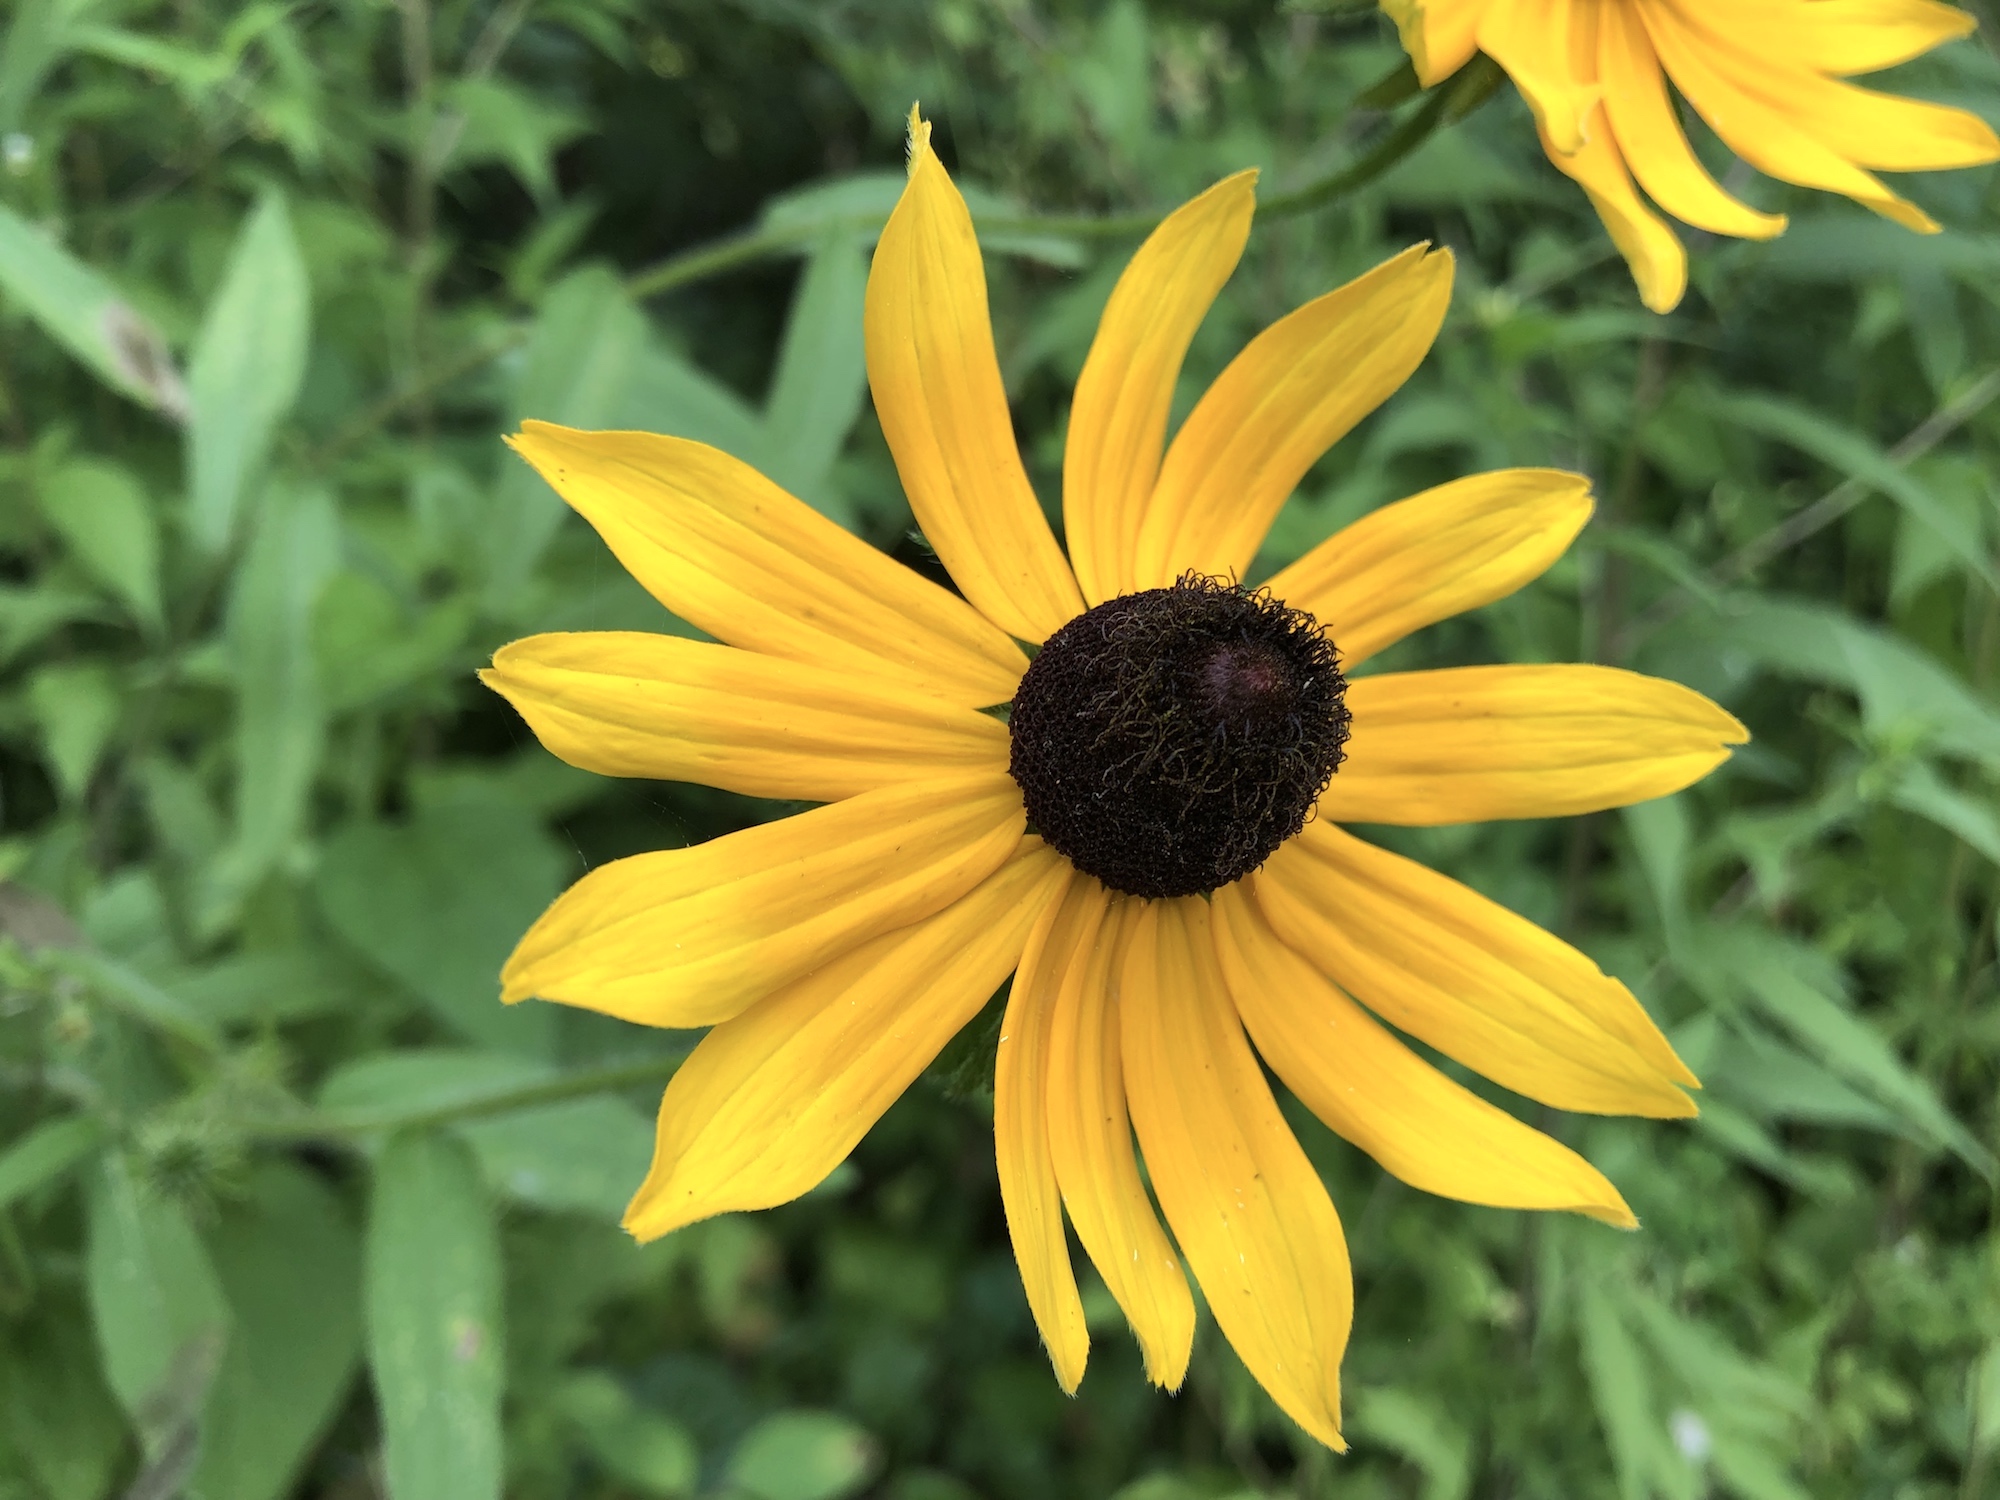 Black-eyed Susan on banks of Marion Dunn Pond in Madison, Wisconsin on July 25, 2019.